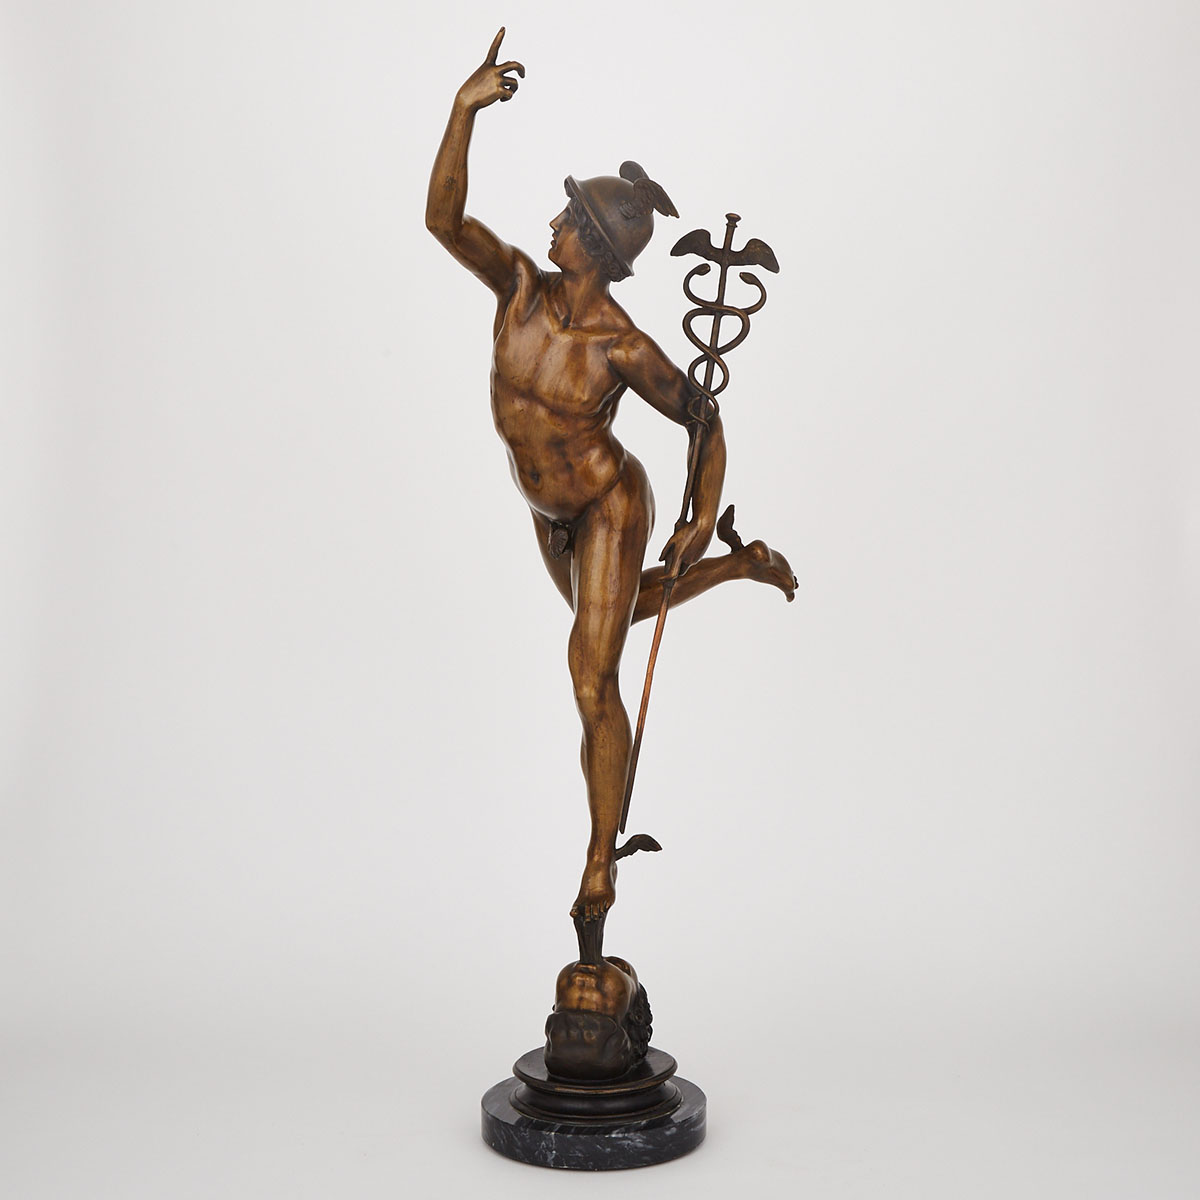 Large Patinated Bronze Figure of Mercury, 19th/early 20th century